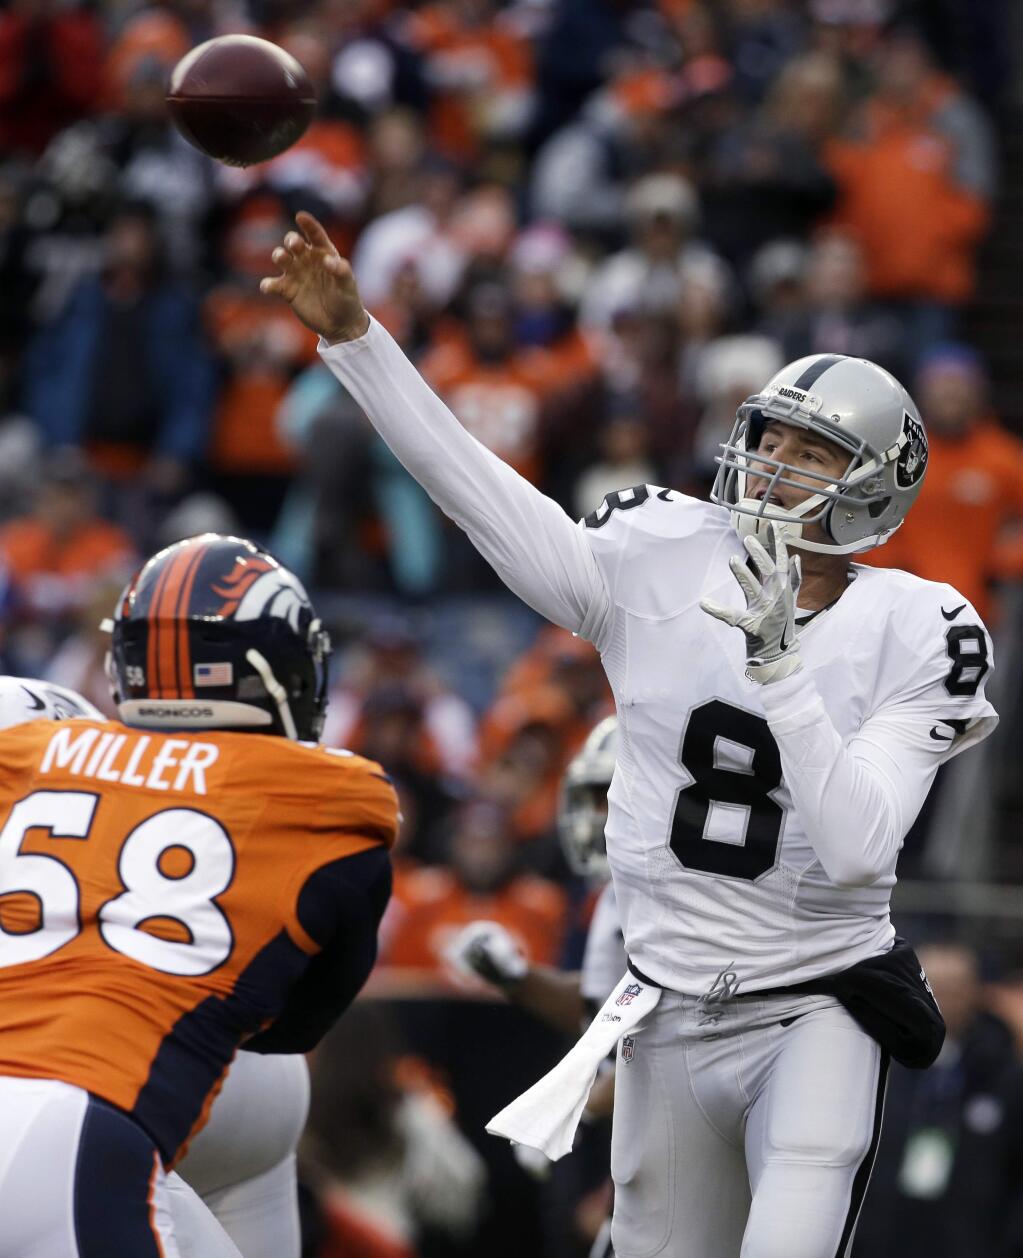 Oakland Raiders quarterback Connor Cook passes against the Denver Broncos during the first half of an NFL football game, Sunday, Jan. 1, 2017, in Denver. Cook came into the game after Raiders quarterback Matt McGloin was injured. (AP Photo/Joe Mahoney)